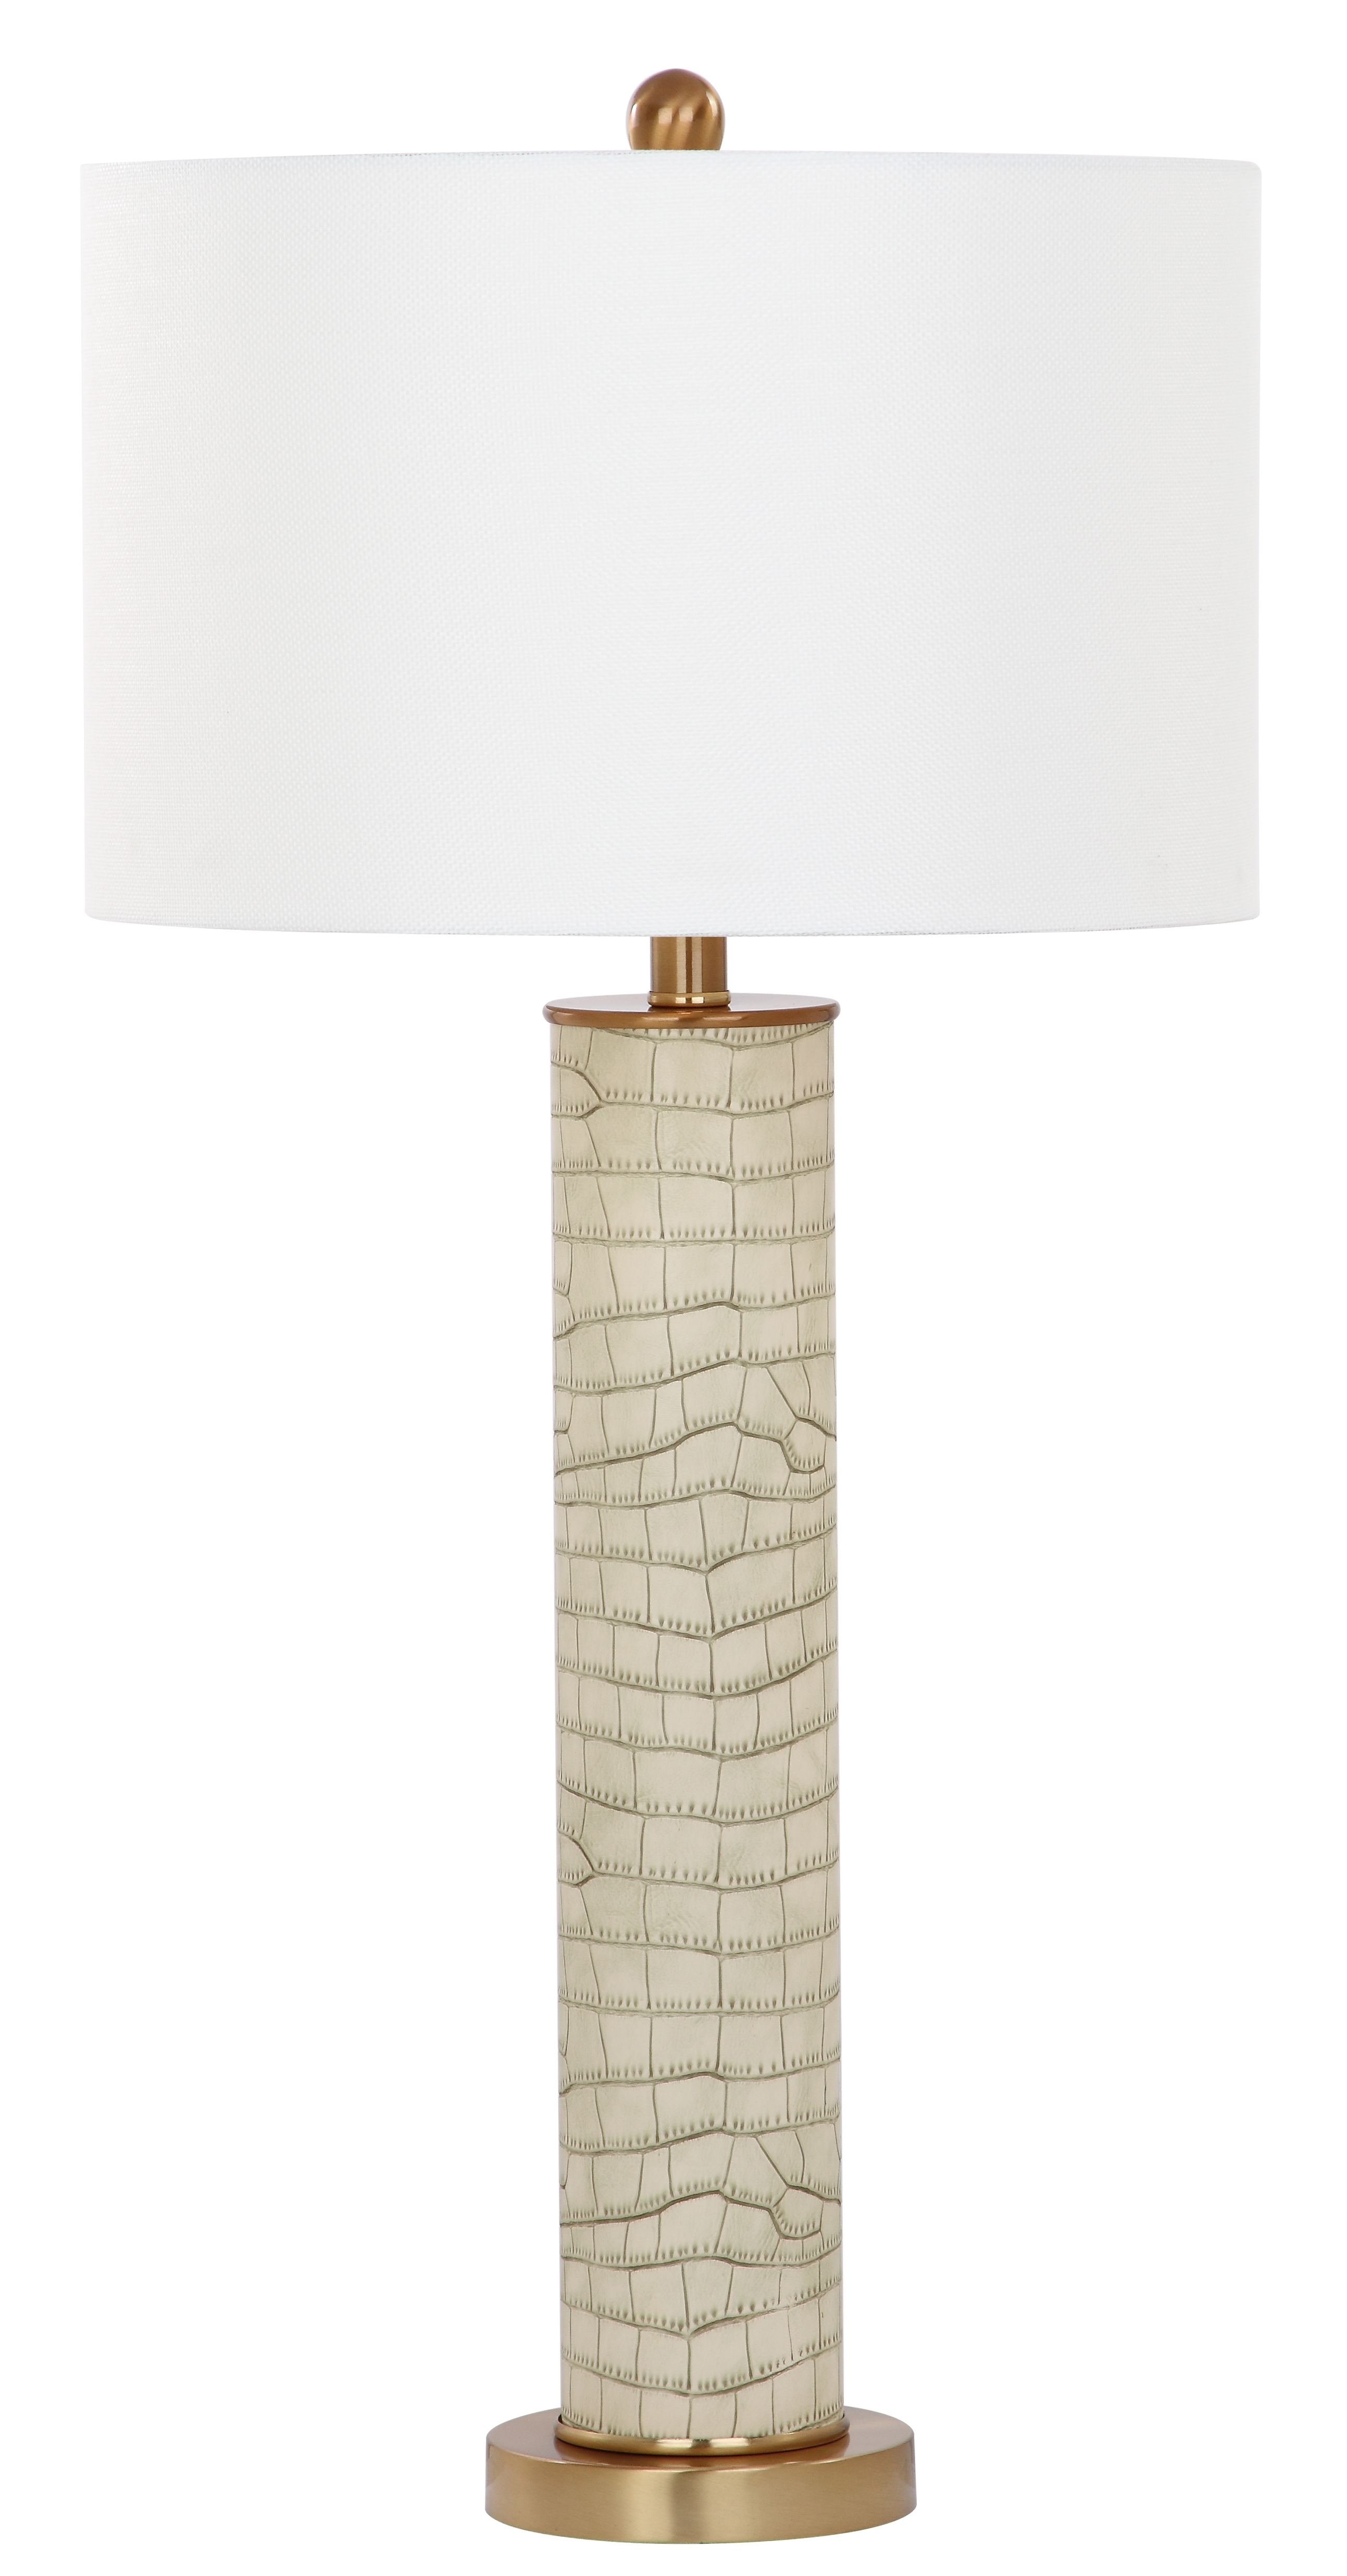 Ollie 31.5-Inch H Faux Alligator Table Lamp - Cream - Arlo Home - Image 3